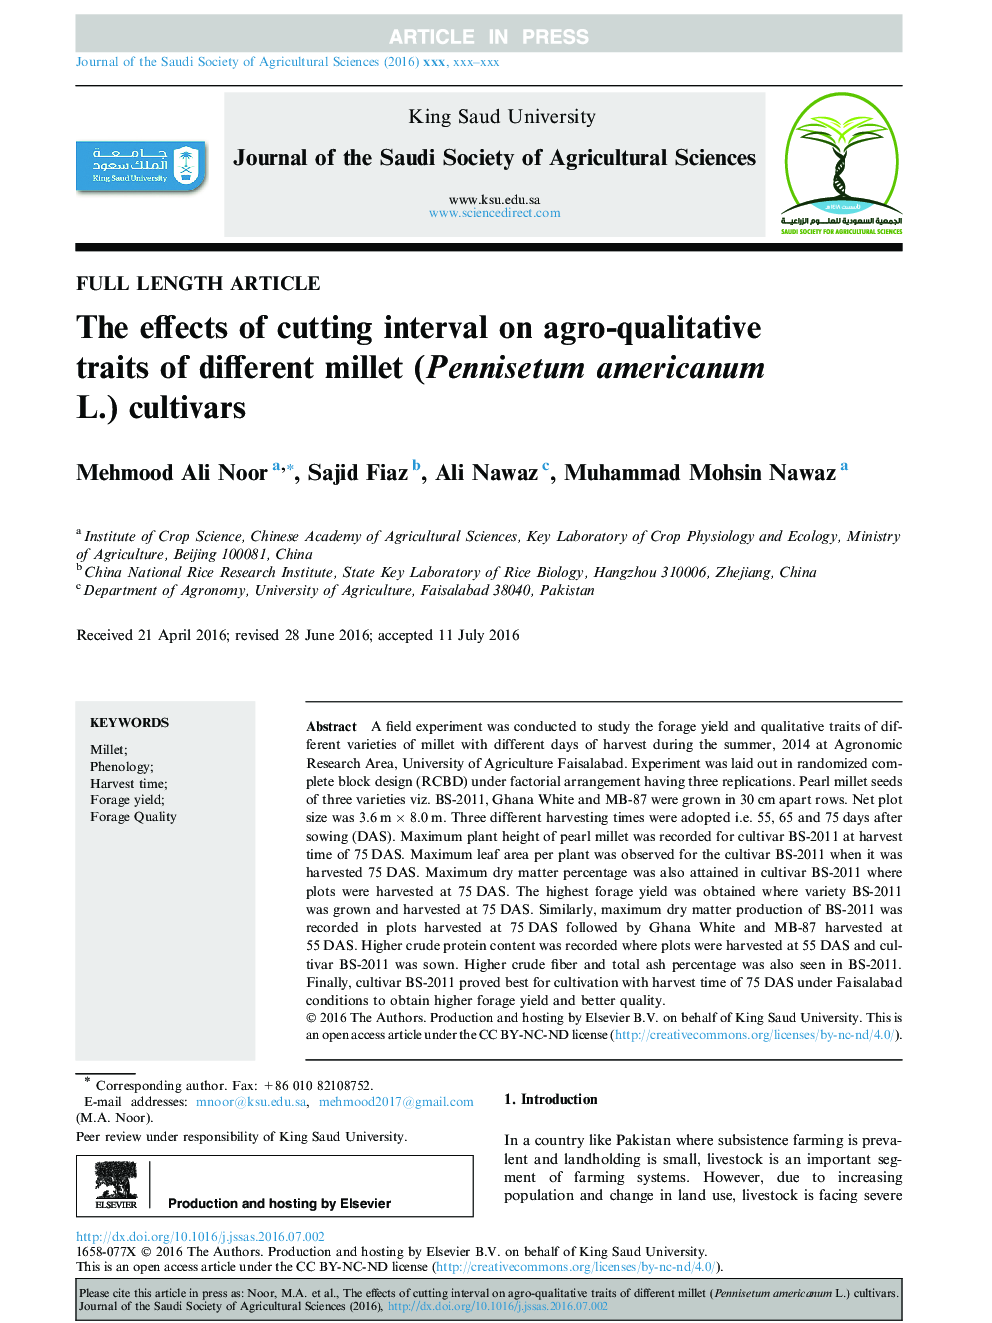 The effects of cutting interval on agro-qualitative traits of different millet (Pennisetum americanum L.) cultivars